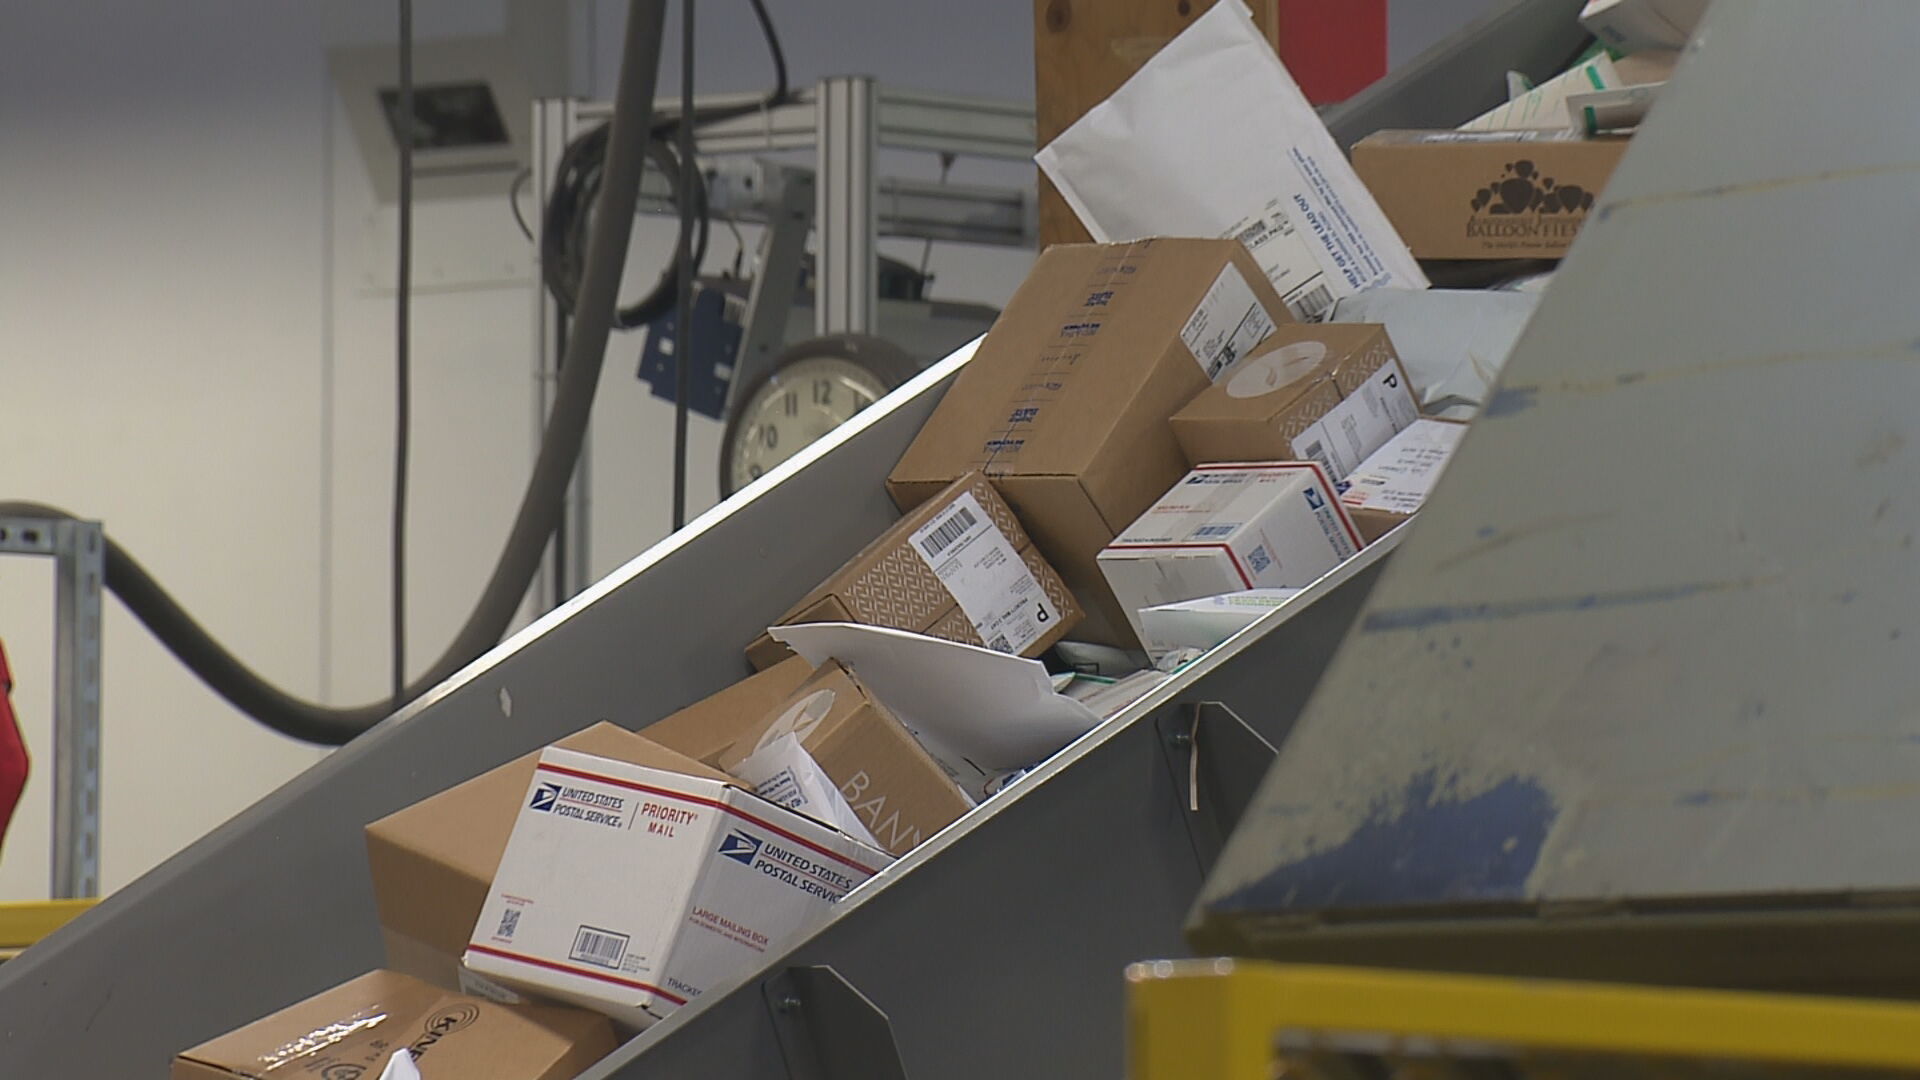 USPS Slowdown: Why You Should Expect Longer Mail Delivery Times This Holiday Season